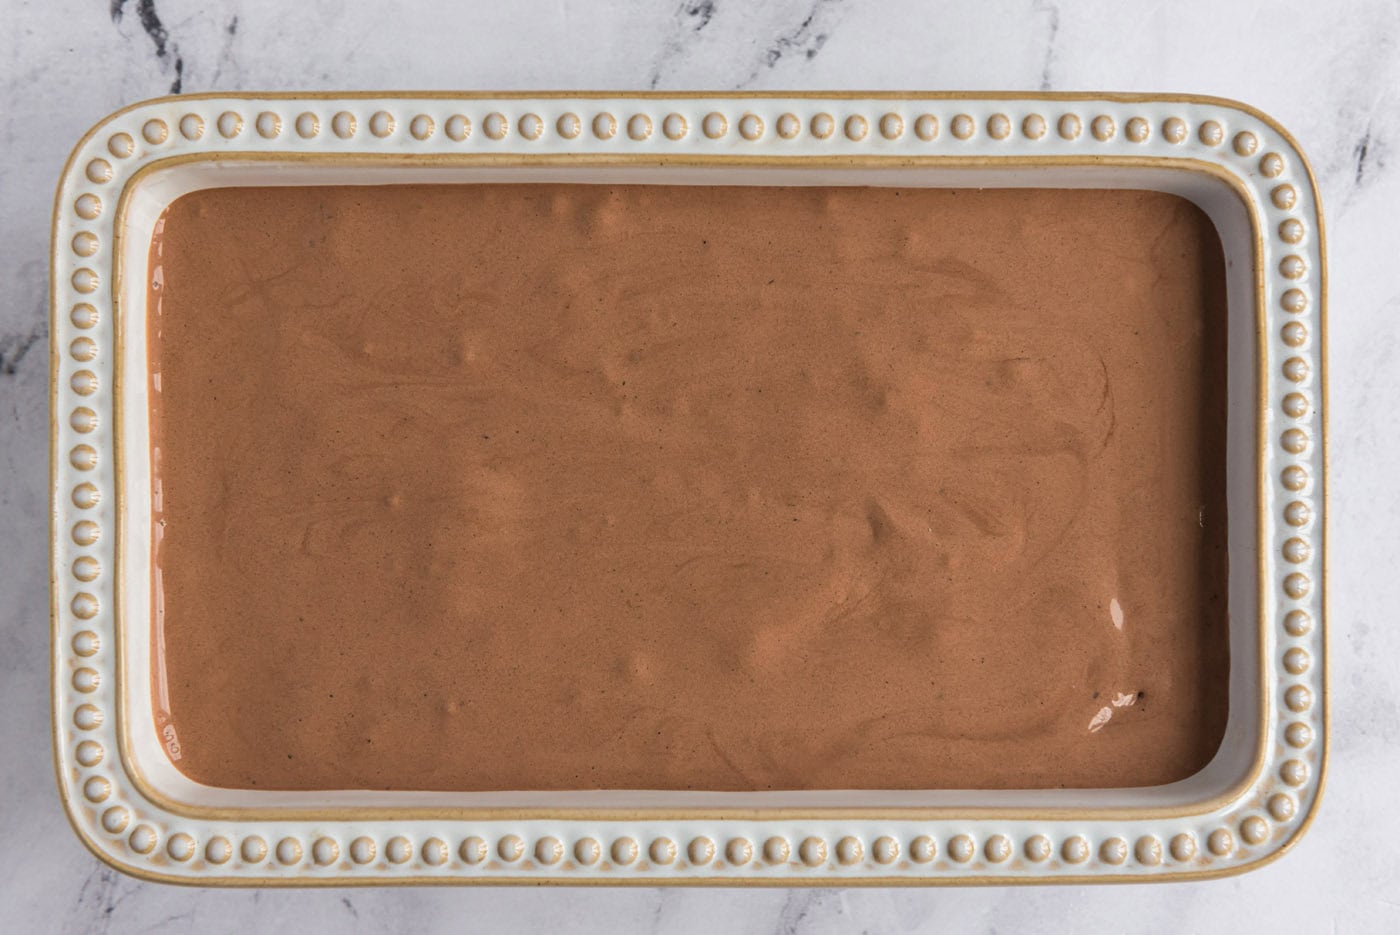 homemade chocolate ice cream mixture in a loaf pan